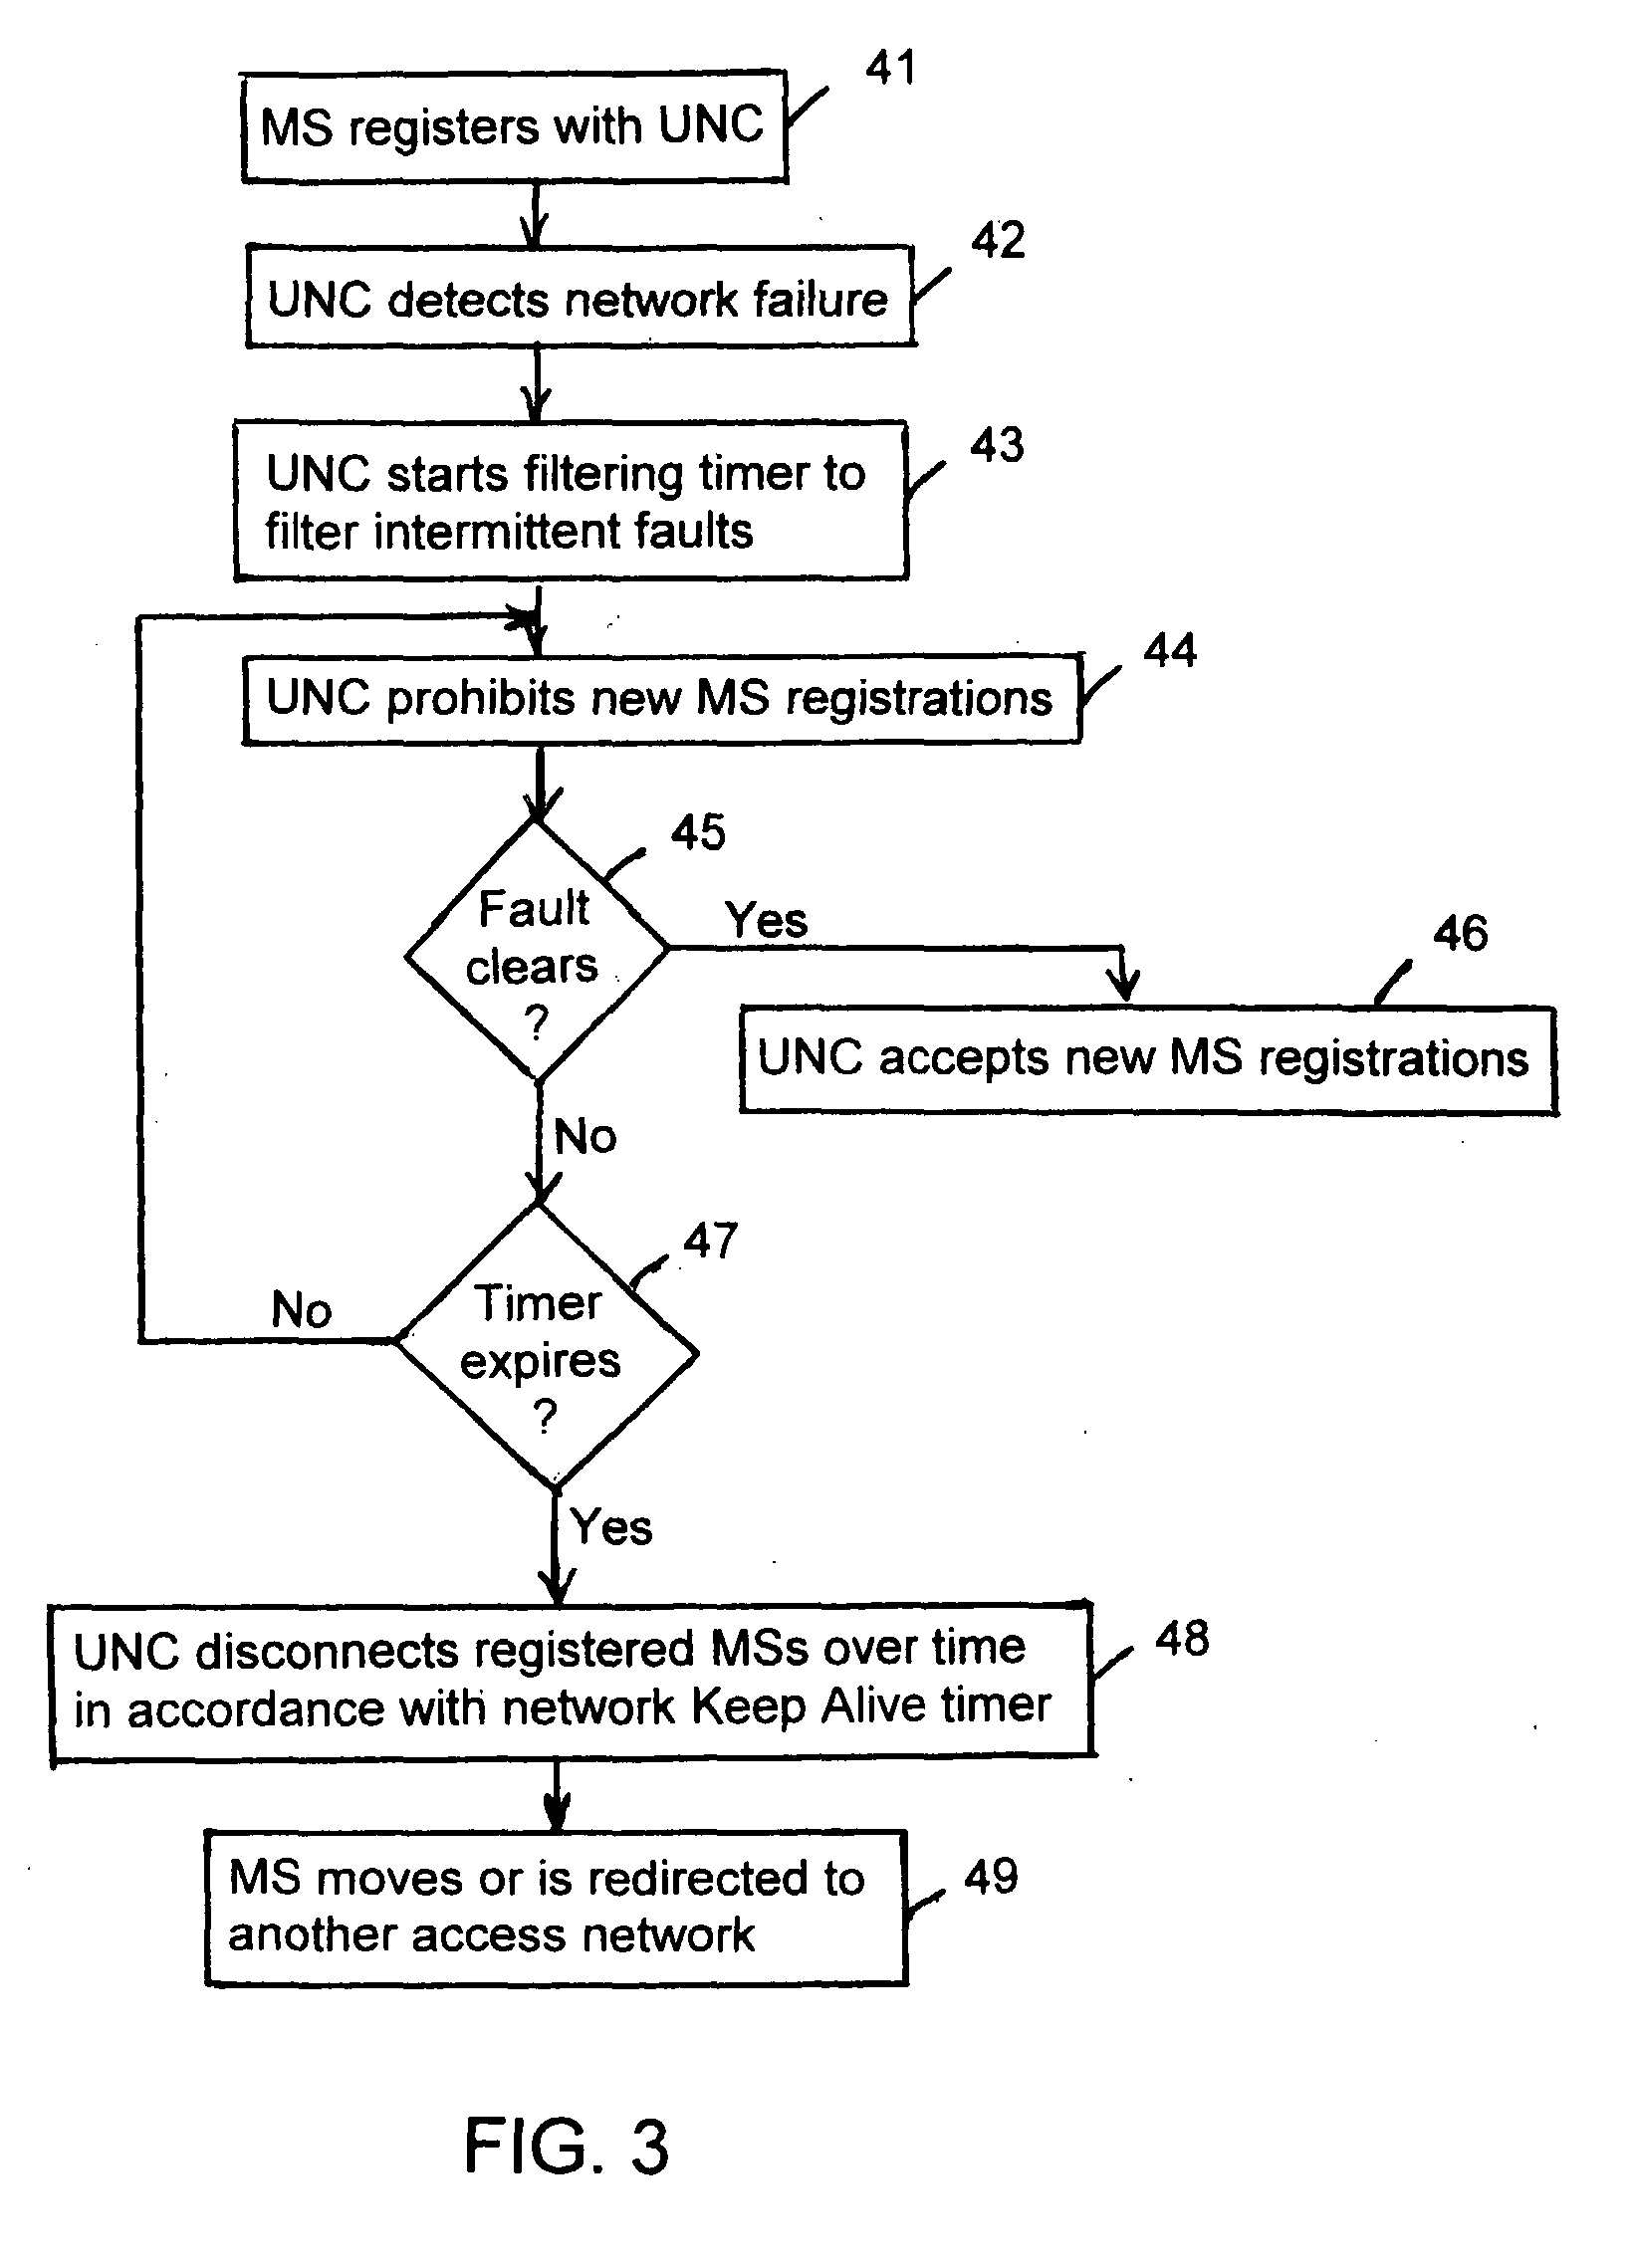 Early service loss or failure indication in an unlicensed mobile access network